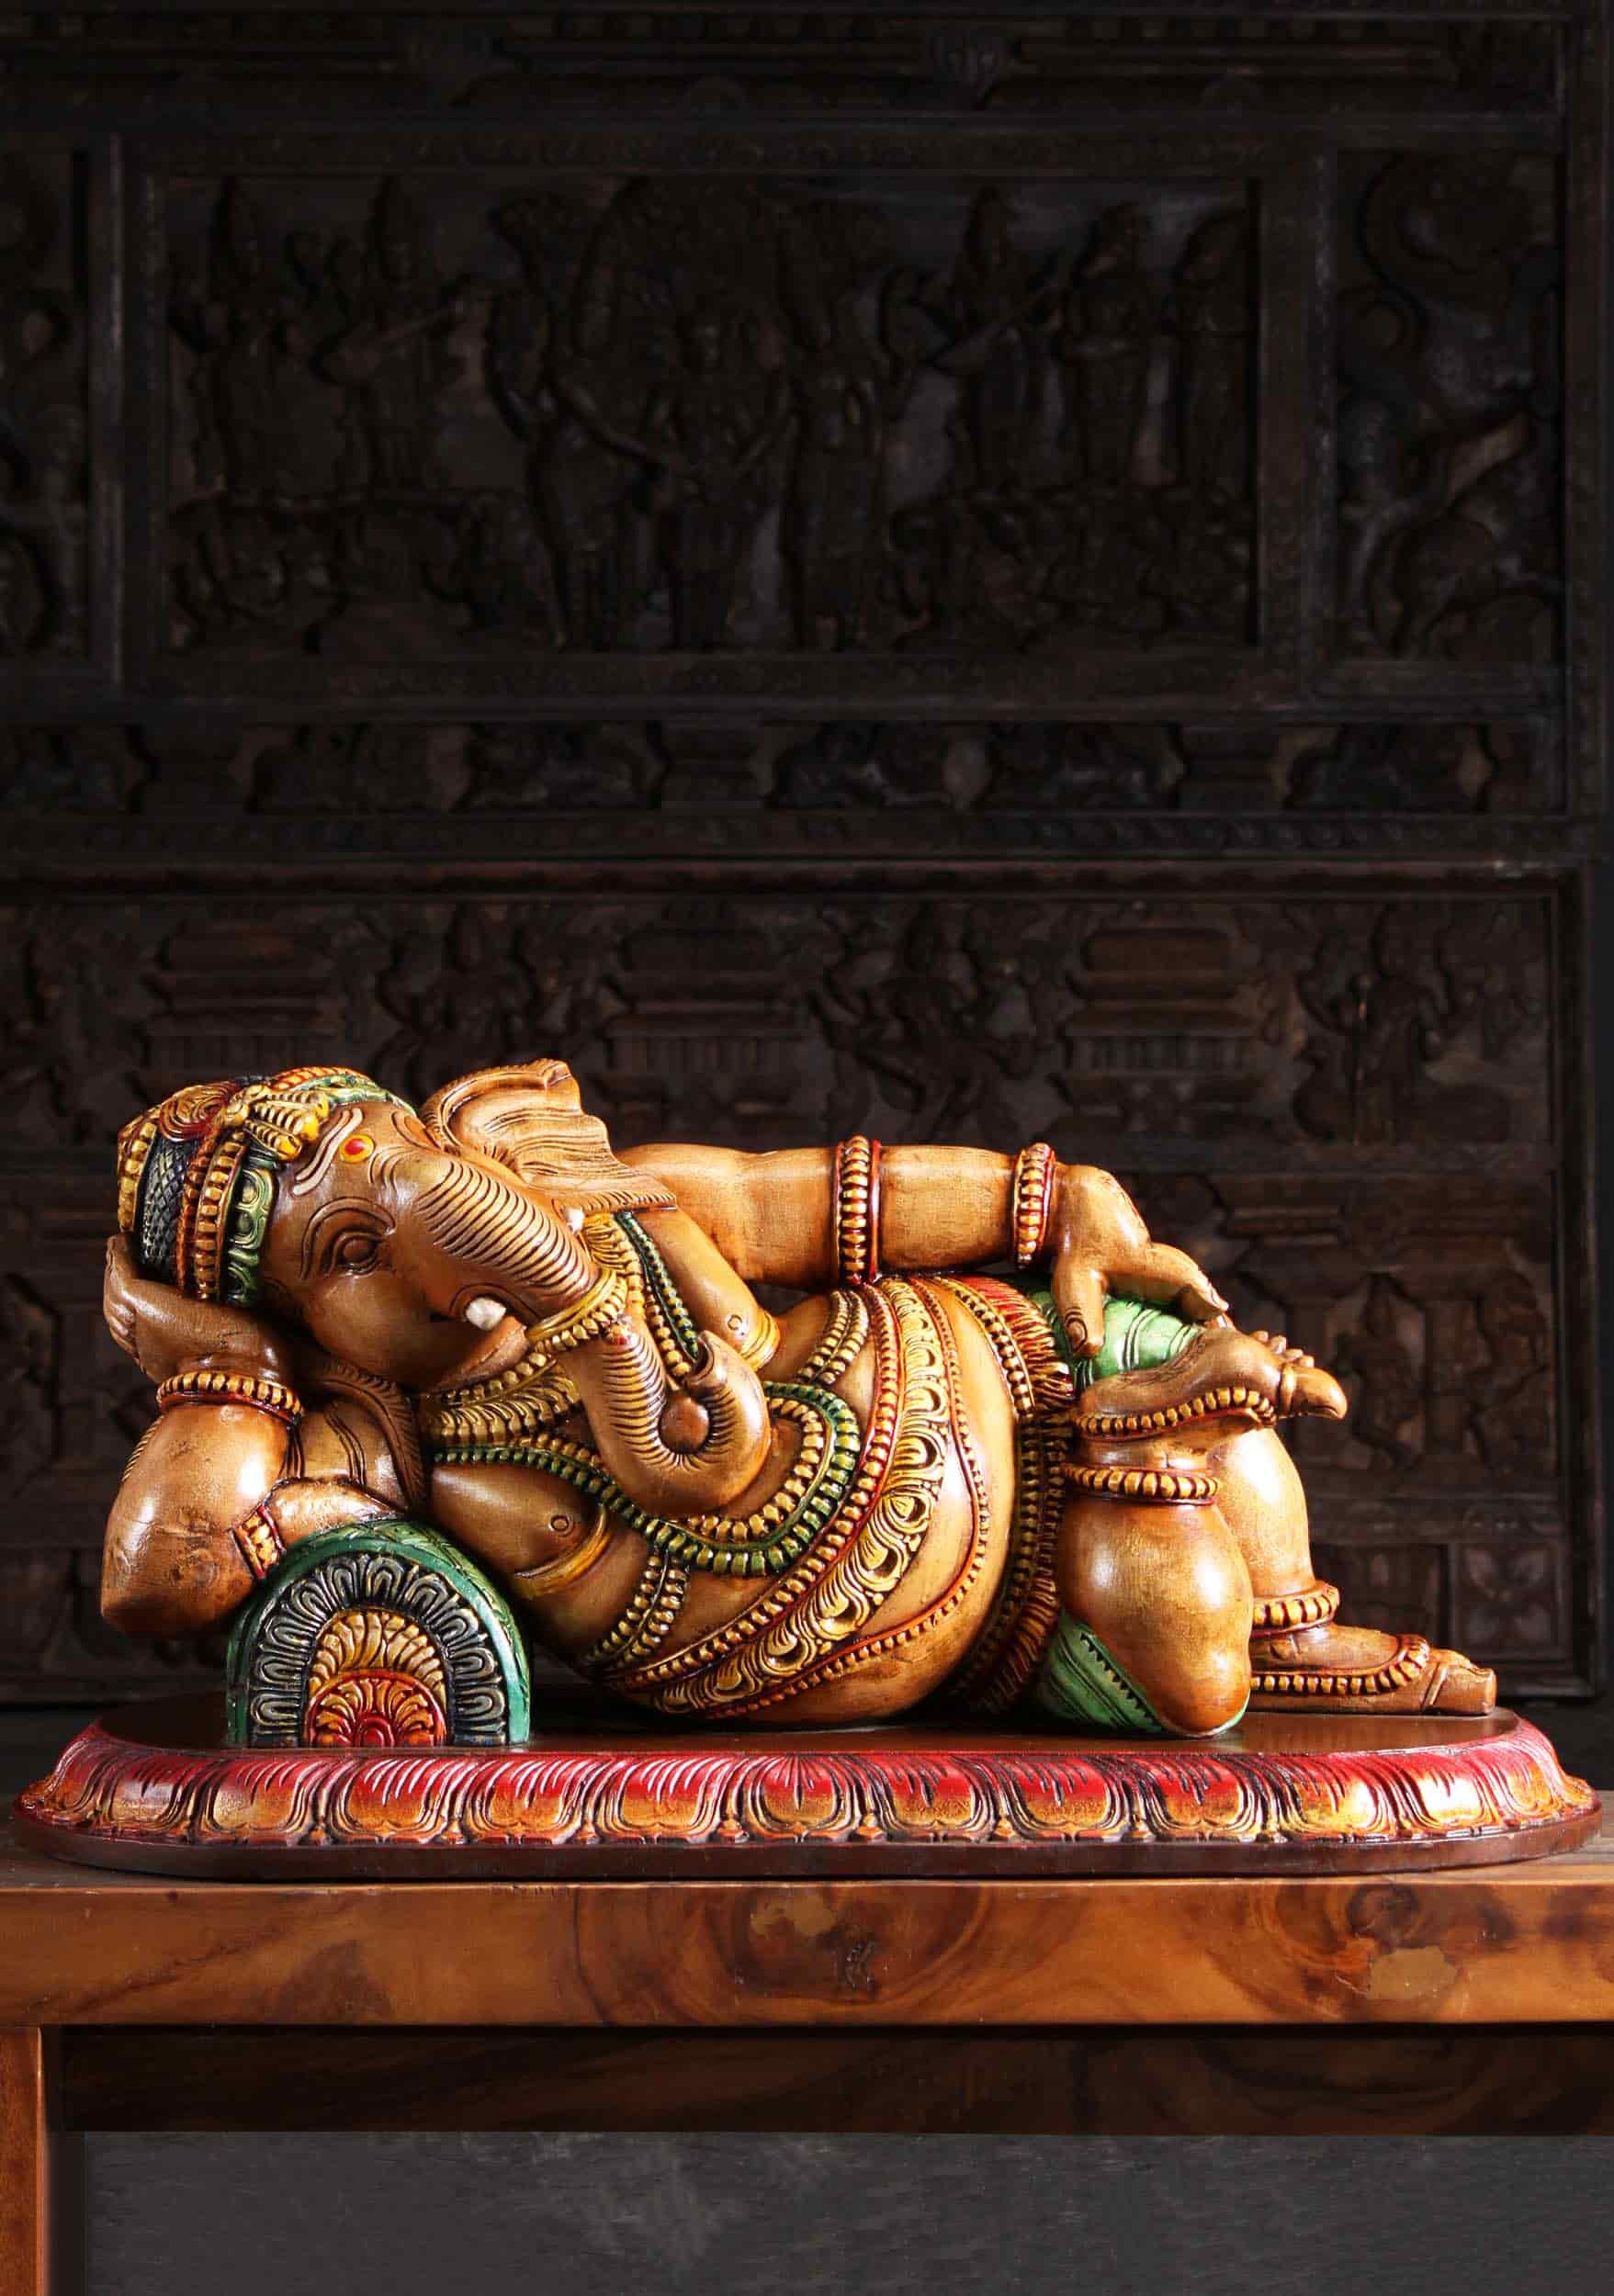 Ganapati figurine in a relaing posture, figurine made of wood intricate with beautiful carvings